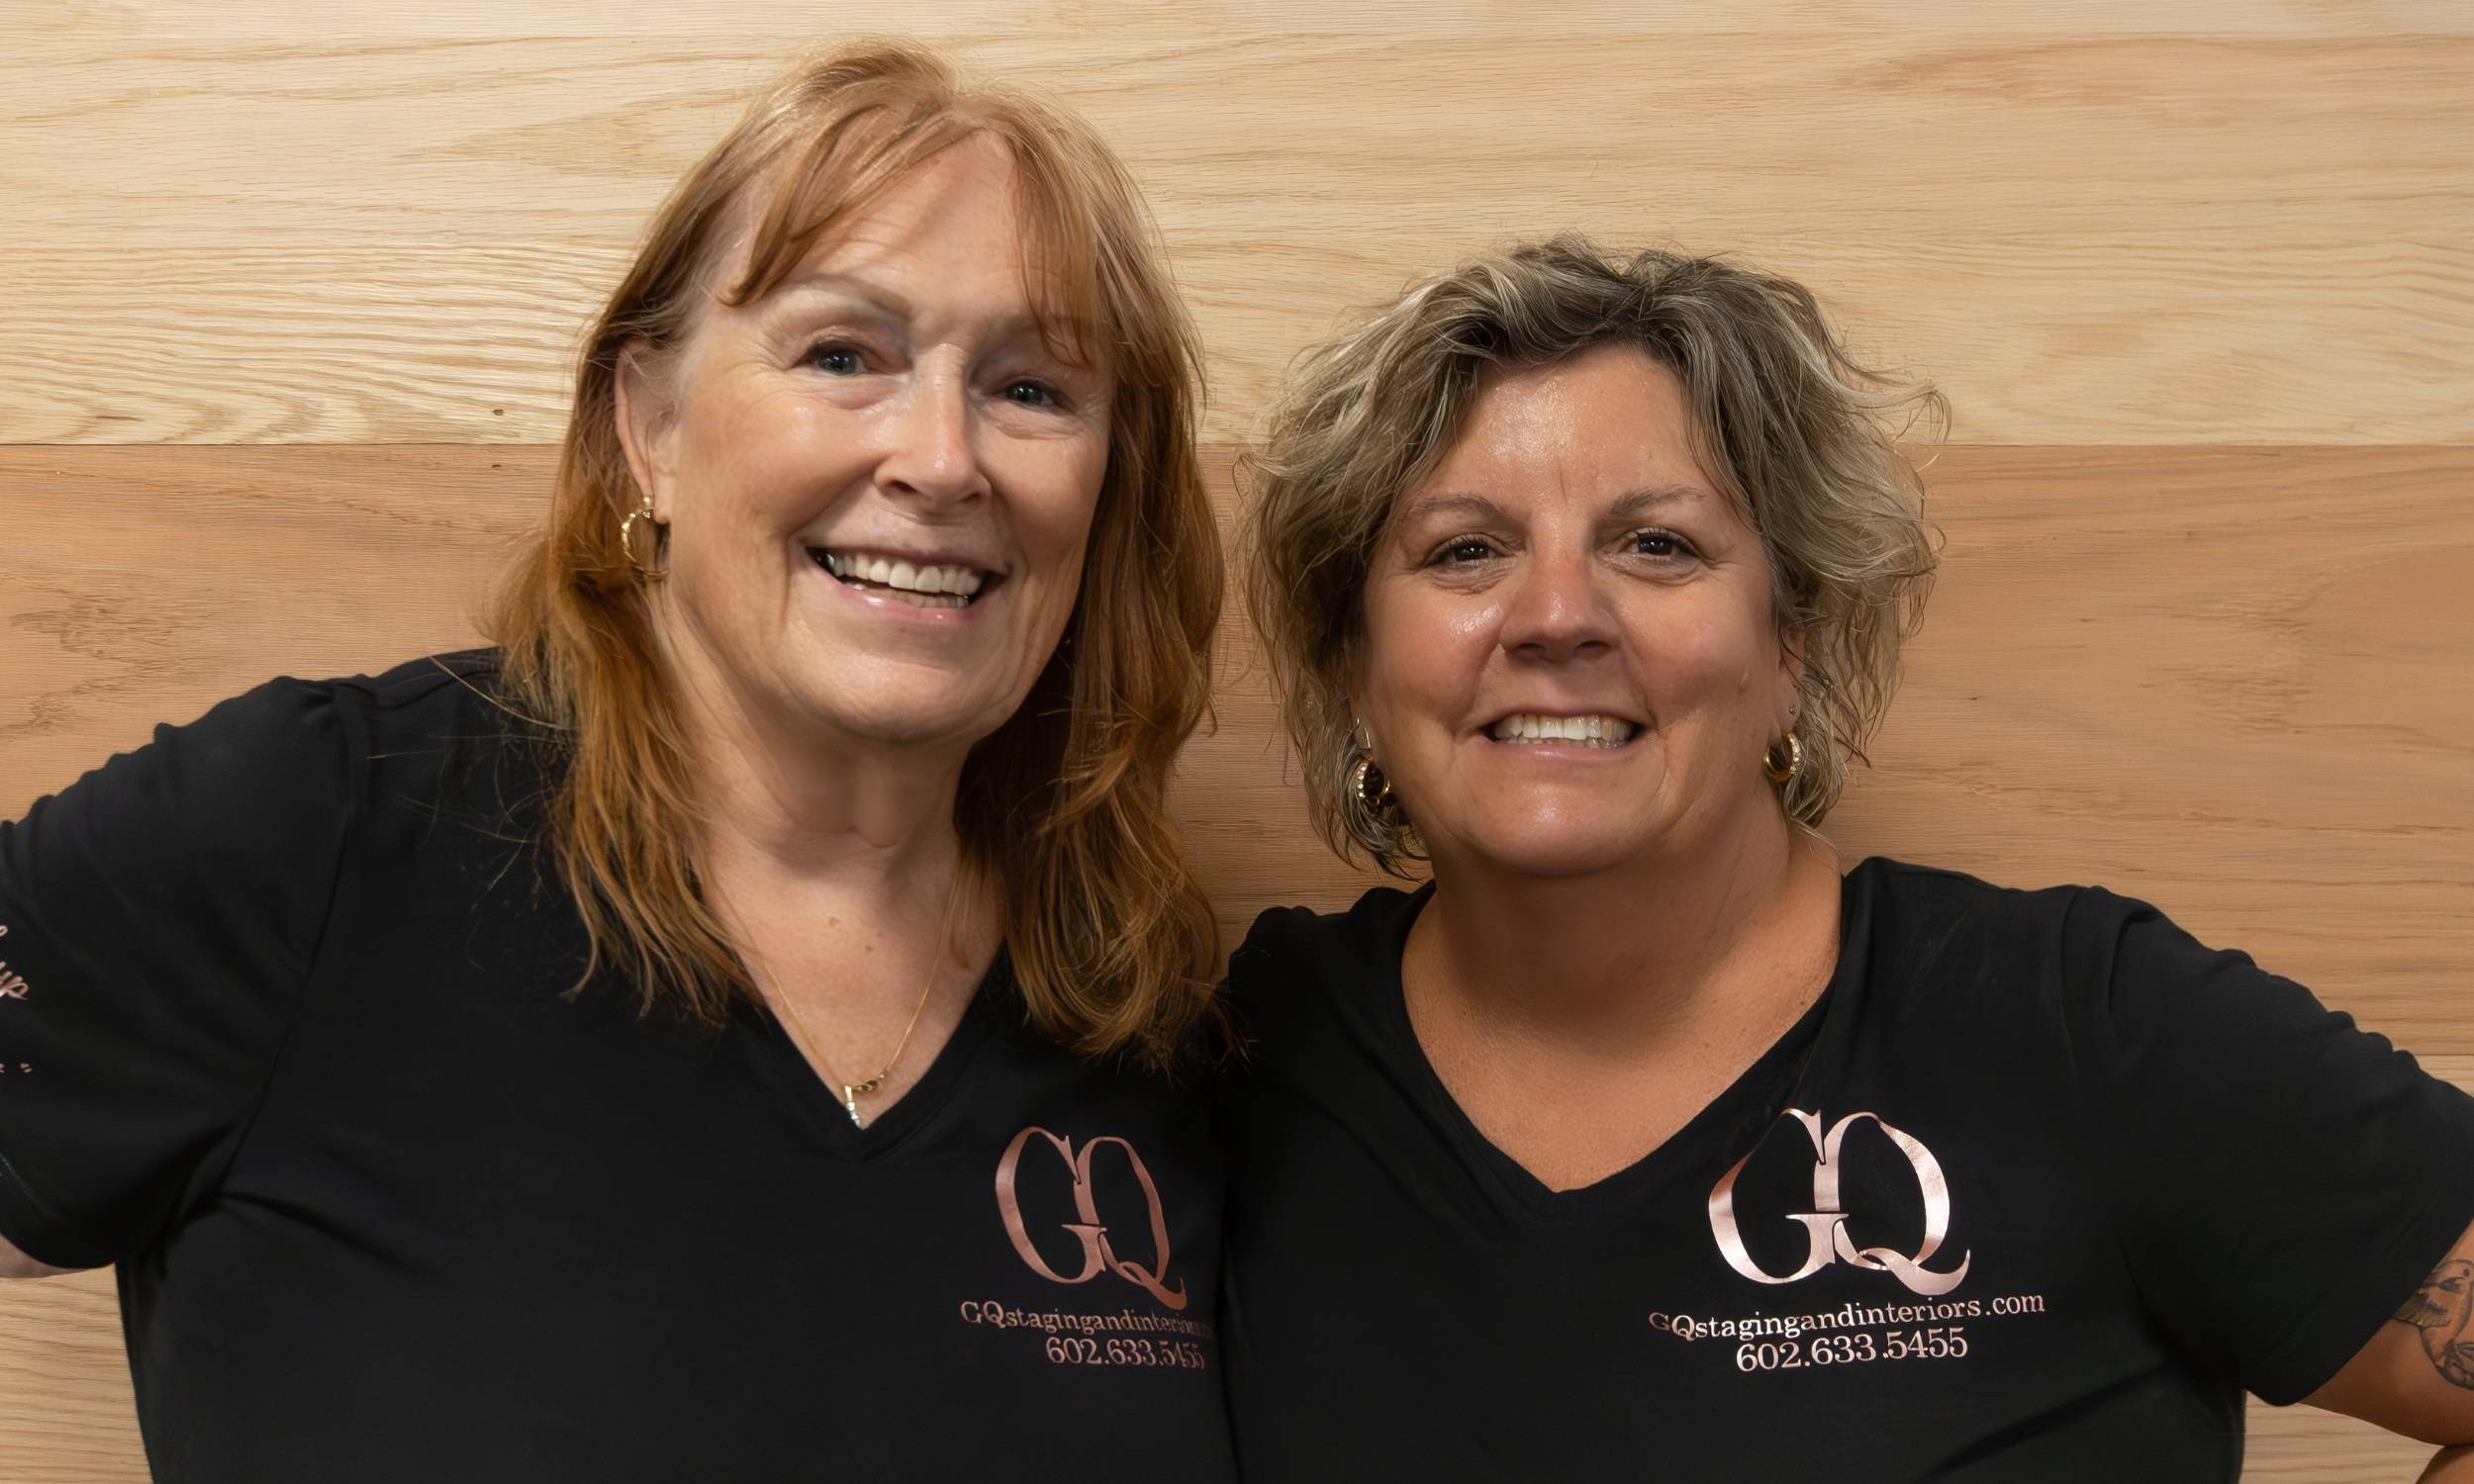 Meet Liz & Katherine - Founders Of GQ Staging And Interiors